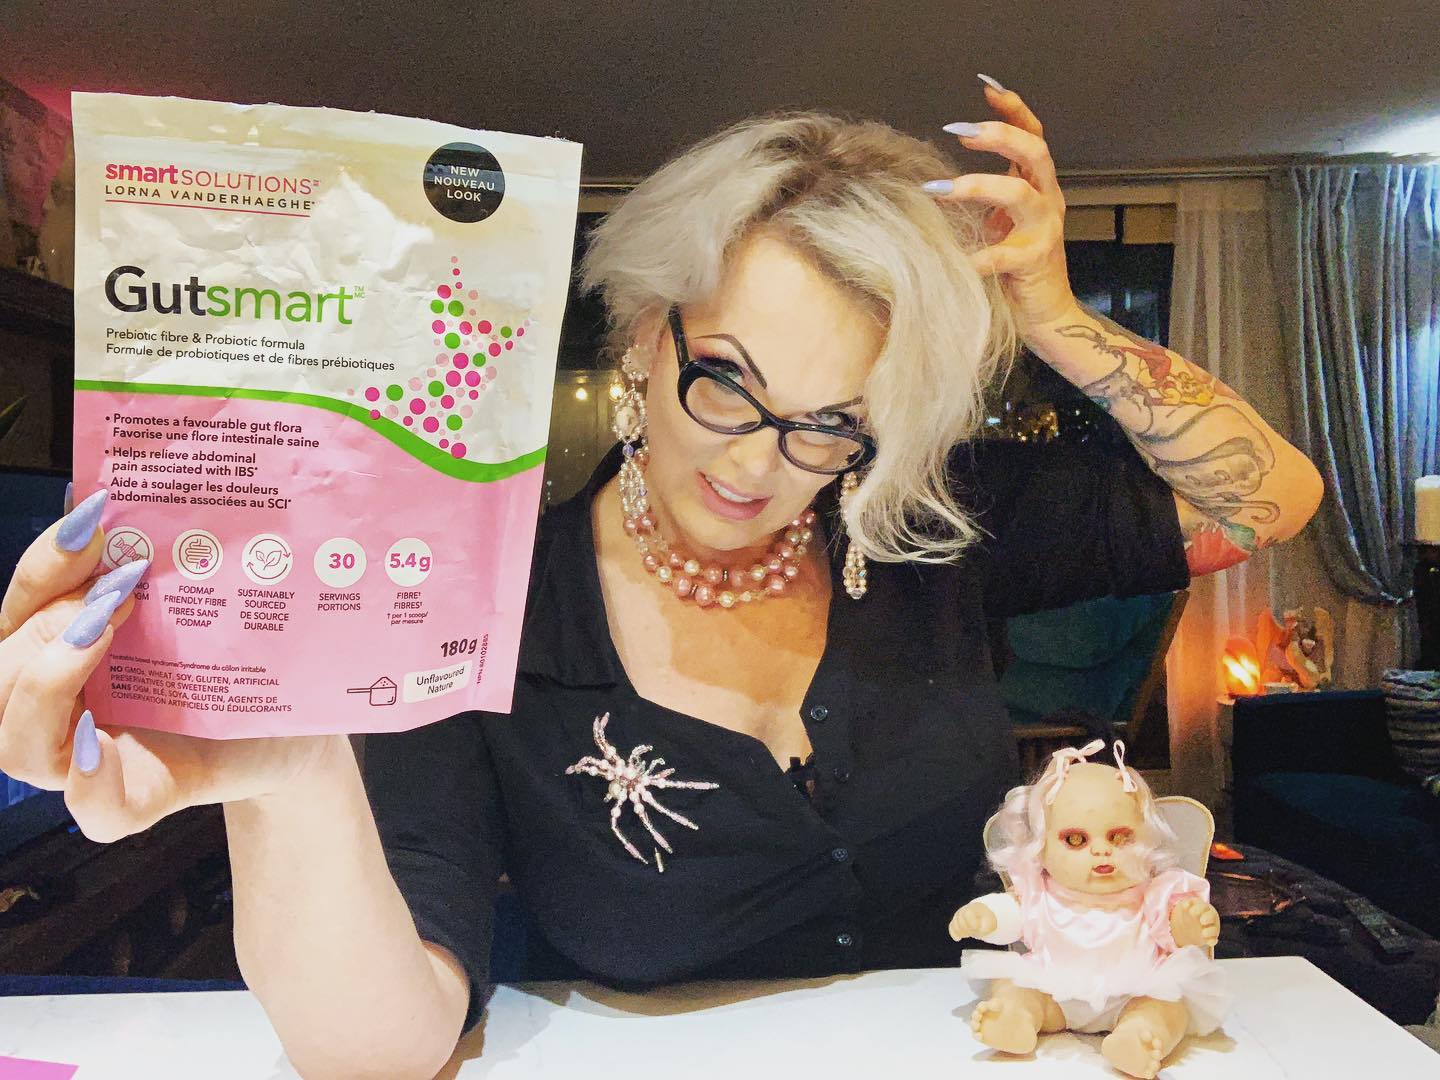 #healthygutflora …..taken awhile for me to get it back after years of #antibioticoverprescribing in my #earlyyears yes I still suffer #abdominalbloating and serious discomfort but not near as bad! #gutsmart by @smartsolutionsca #nongmo #fodmapfriendly #sustainablysourced #nowheat #nosoy #nogluten #noartificialsweeteners or #preservatives #unflavoured get it from my gang at @bodyenergyclub for your #smartchoices another #healthymessage from your fave #greeneyed #dirtyblonde #glamazon #transsexualwoman #lovinglife💞 and #livingitlarge #amazonstyle 💕🖤💕